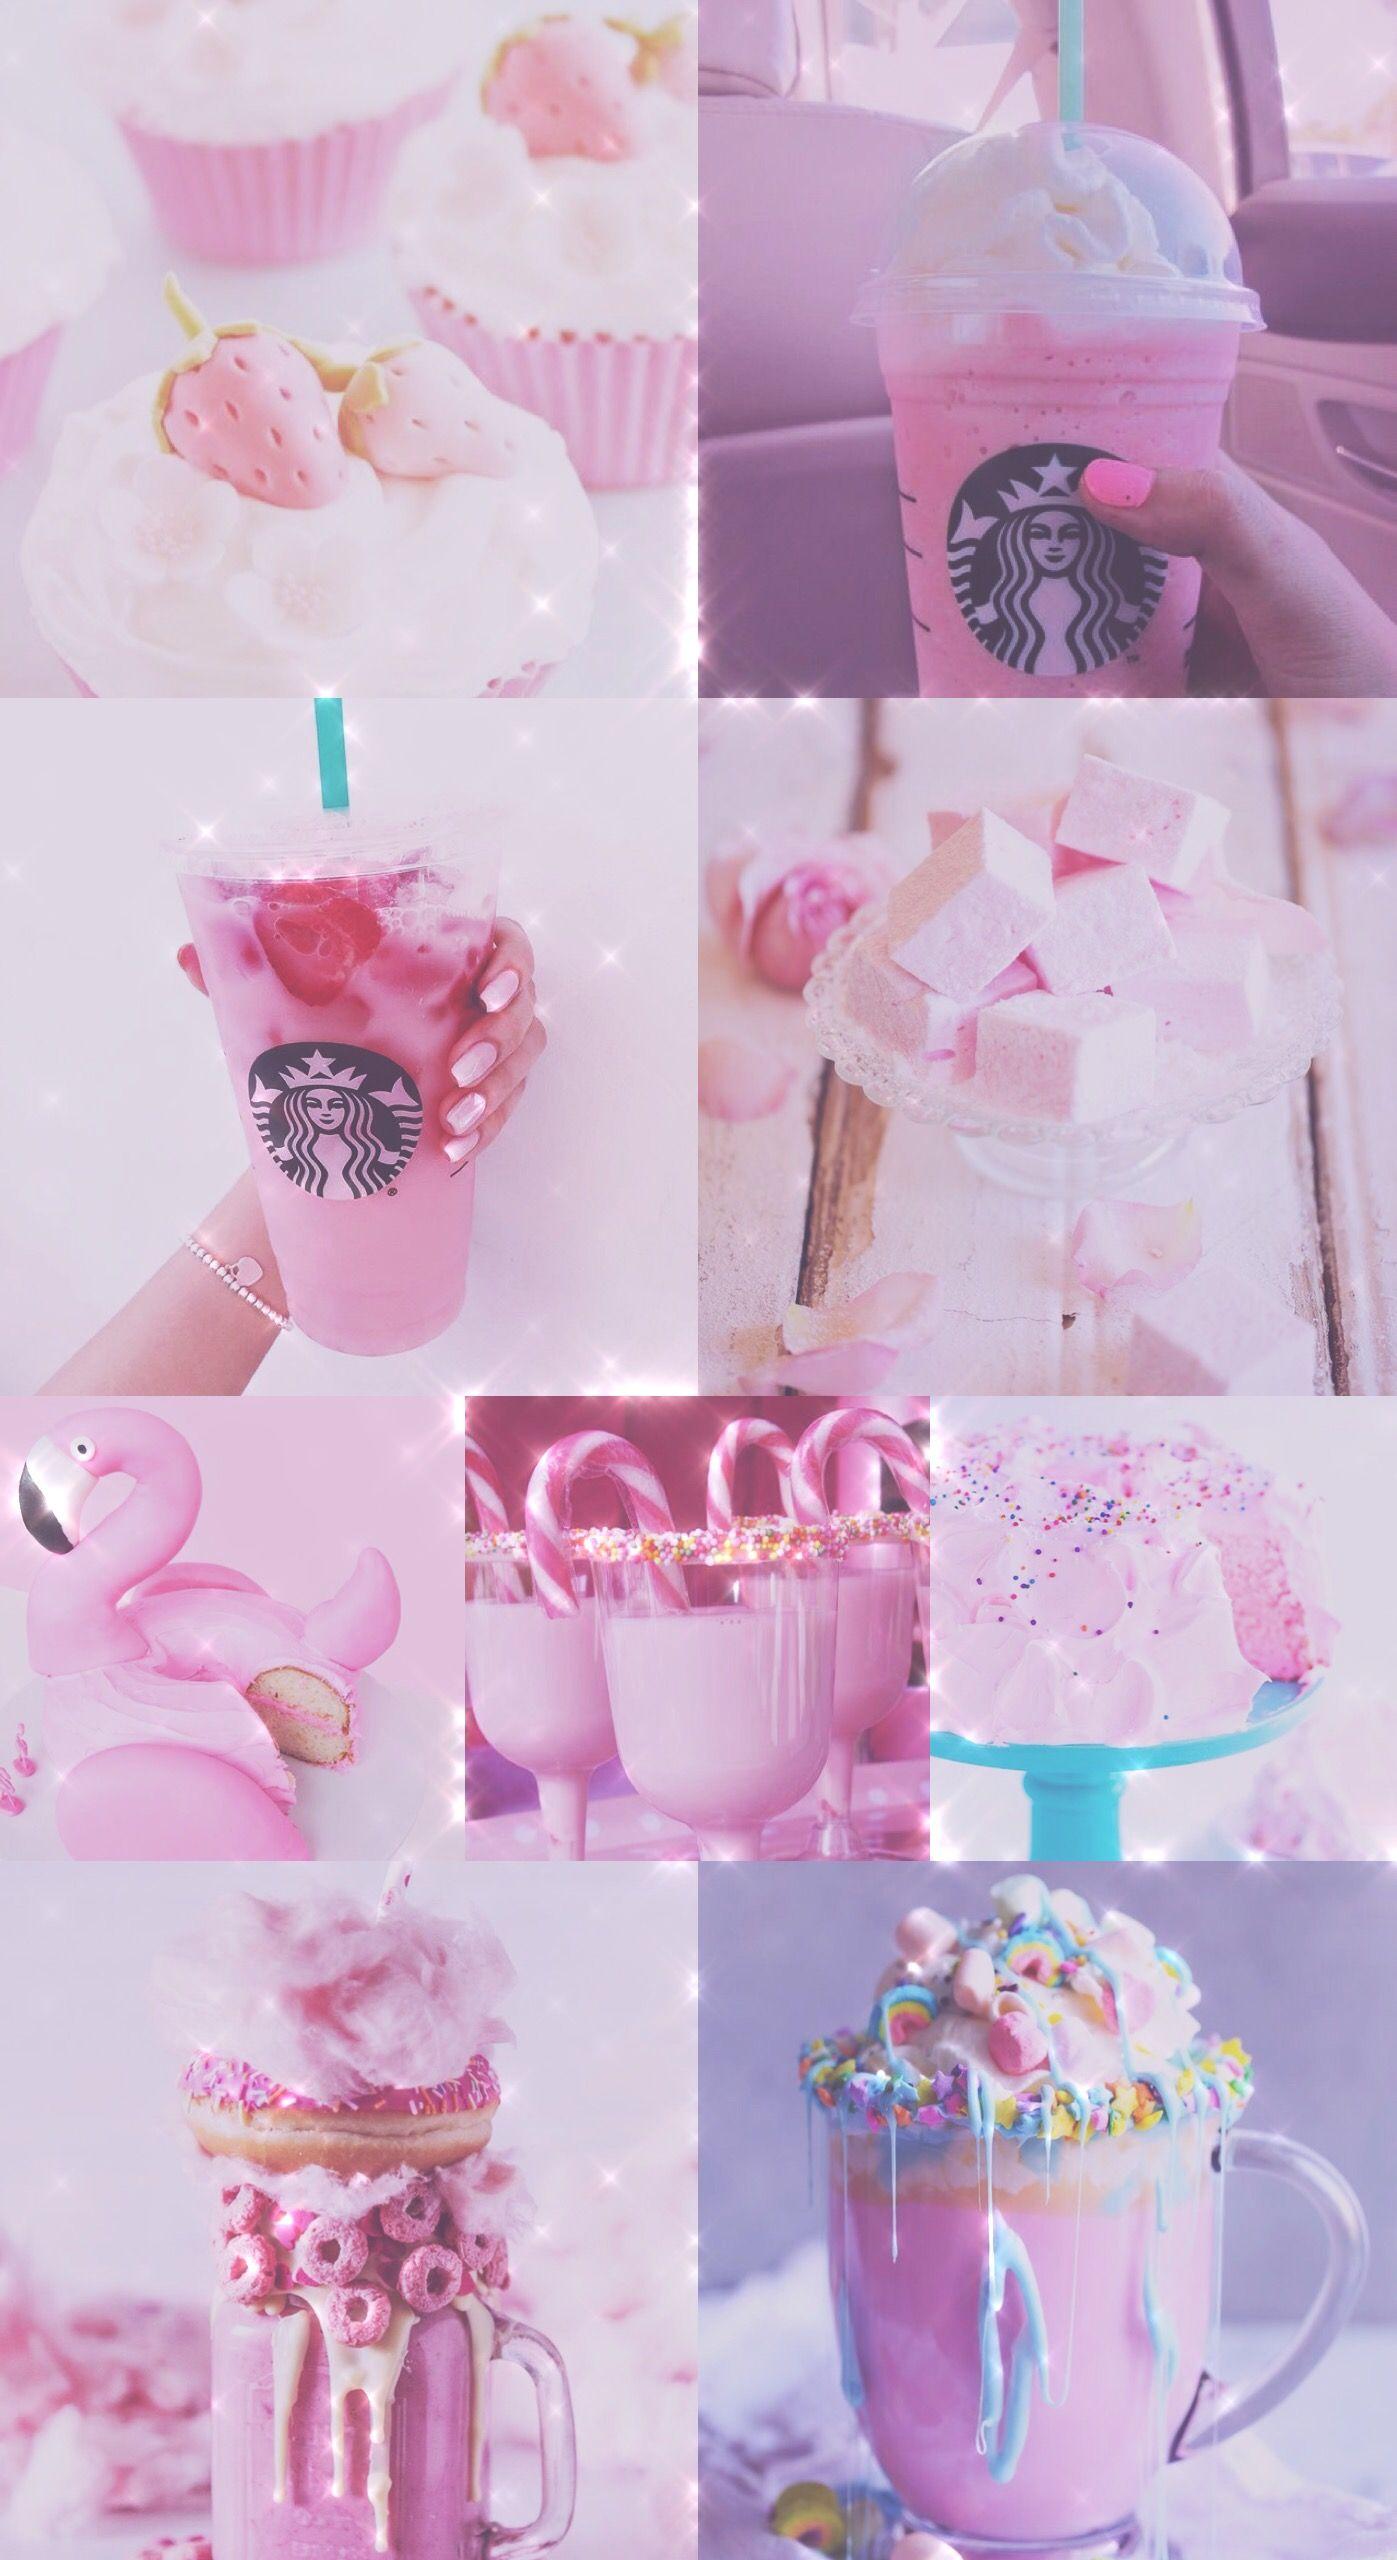 Wallpaper, background, HD, iPhone, Android, sparkly, glitter, sweets, candy, pink, Starbucks, drink. Starbucks wallpaper, Pink wallpaper iphone, Glitter wallpaper